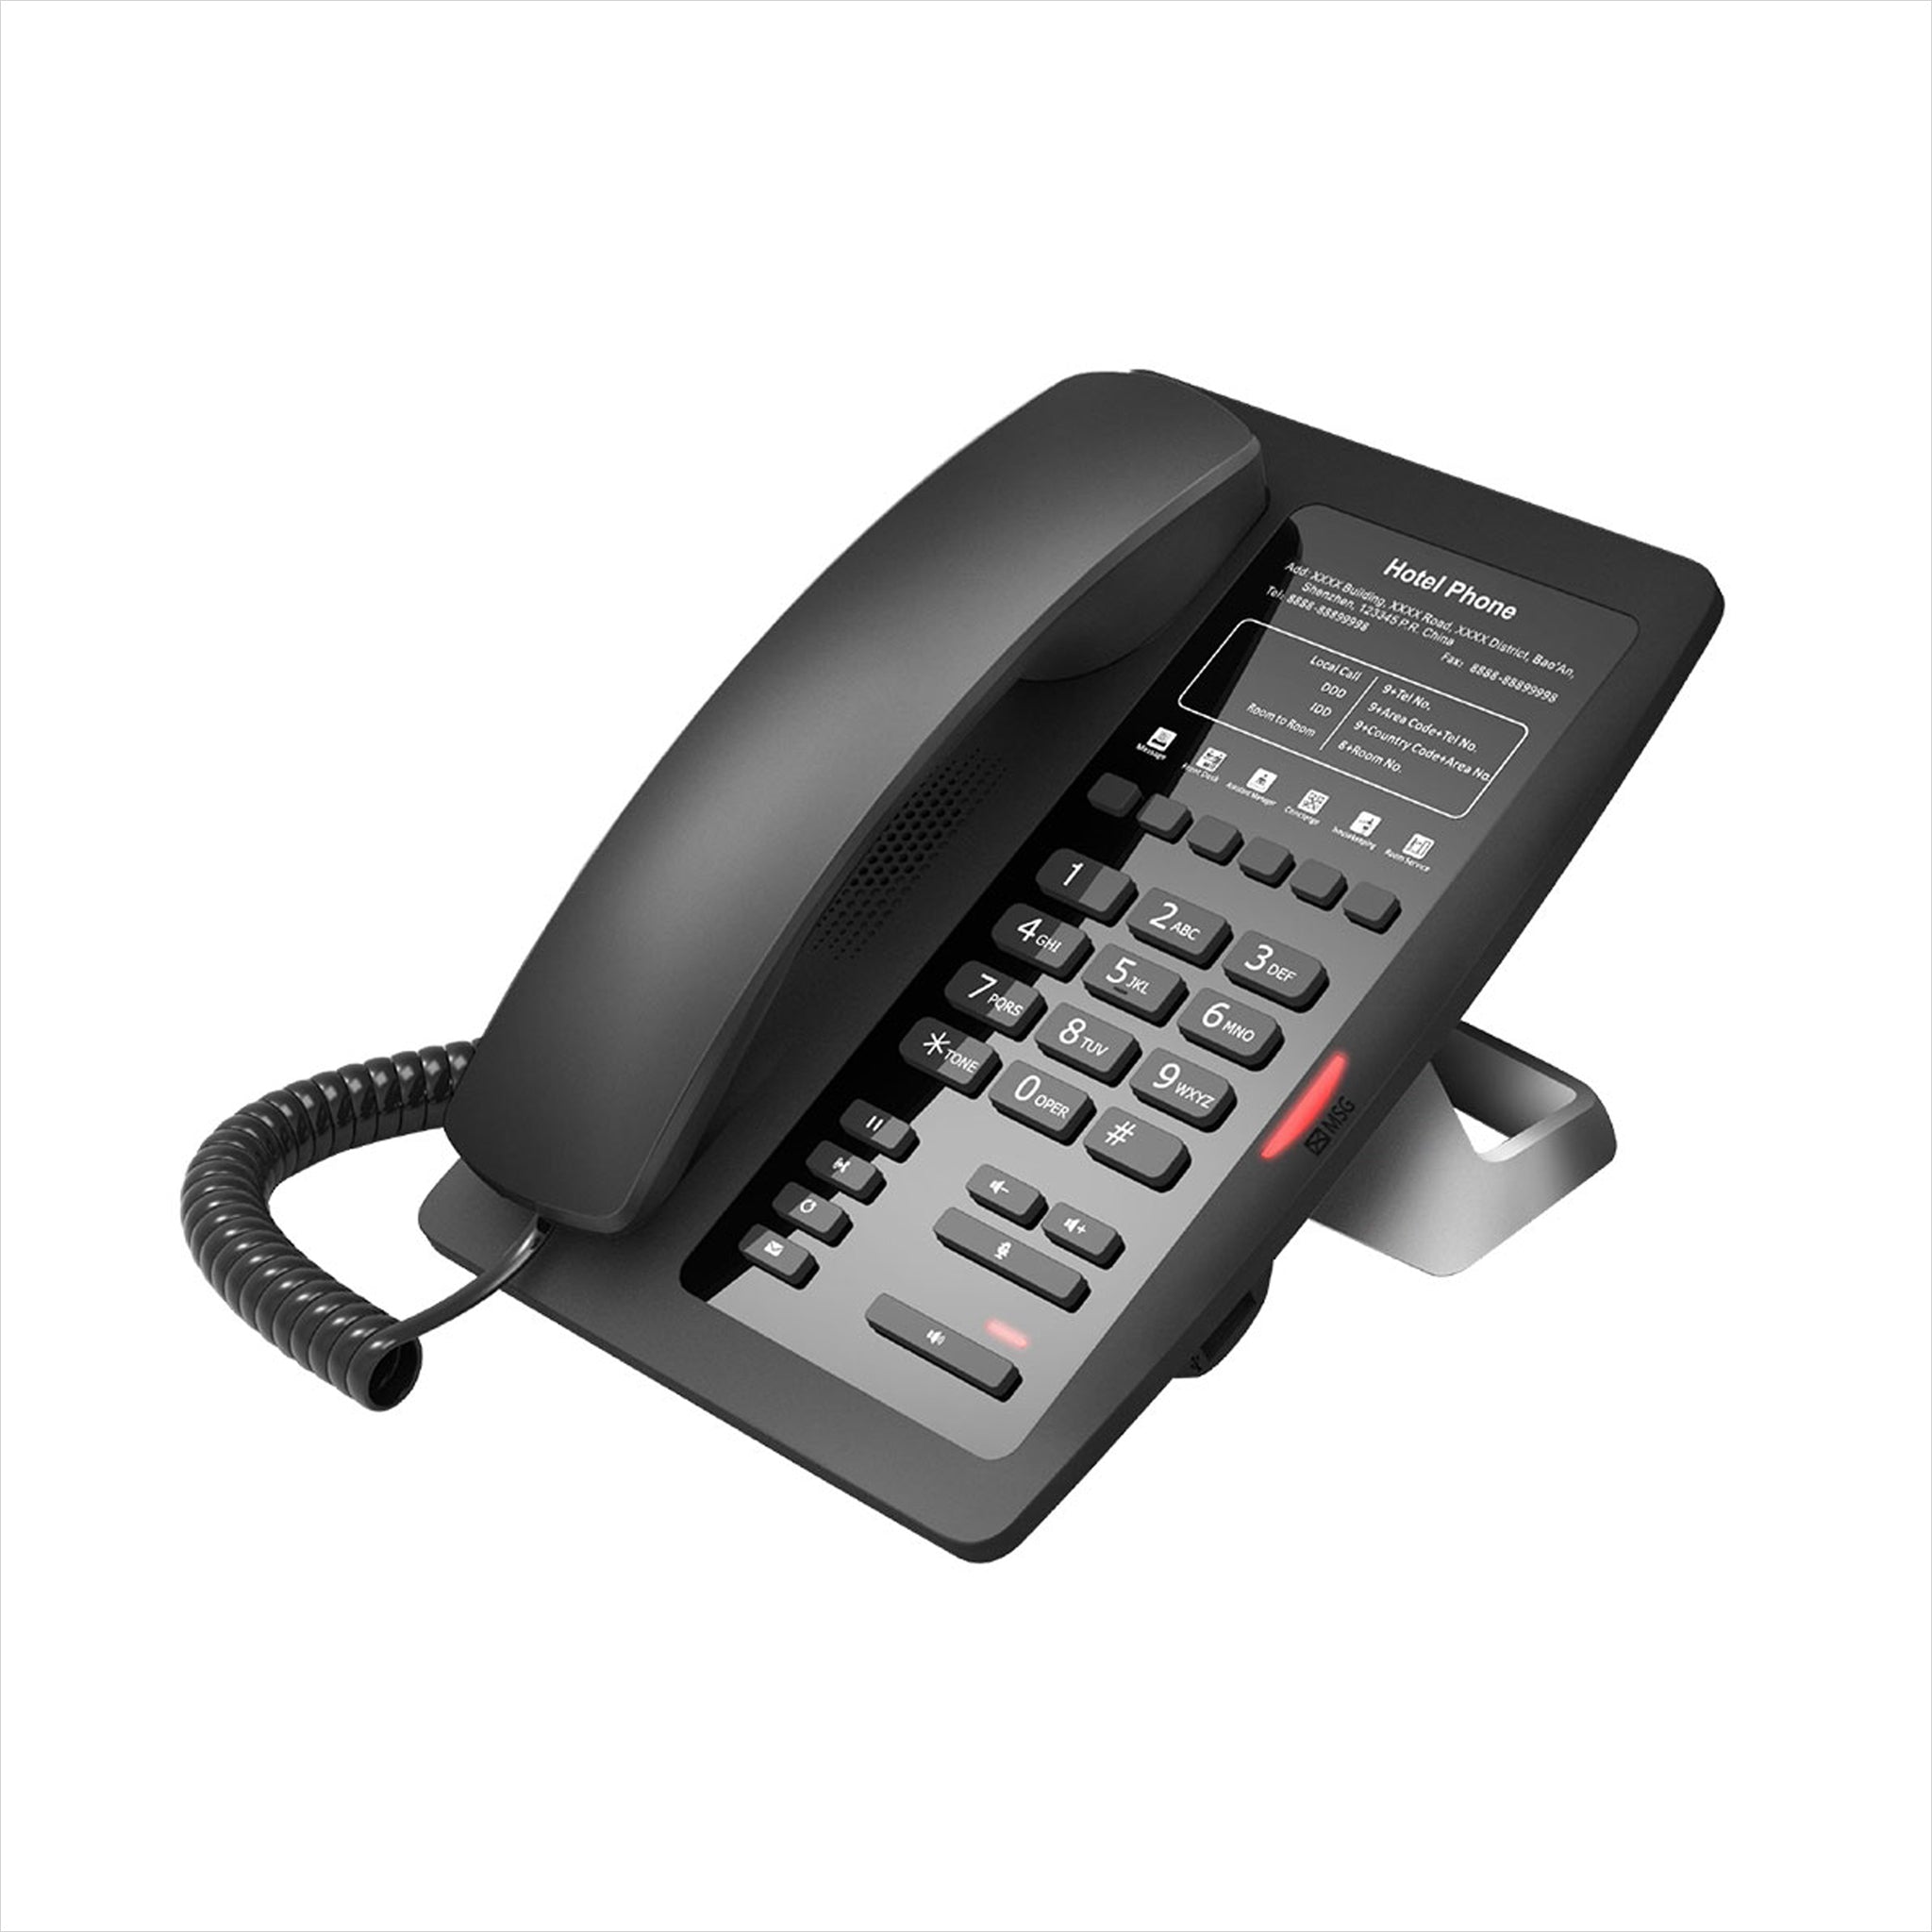 Fanvil H3 Hotel IP Phone with 2 SIP servers and HD Voice | AL-VoIP Store